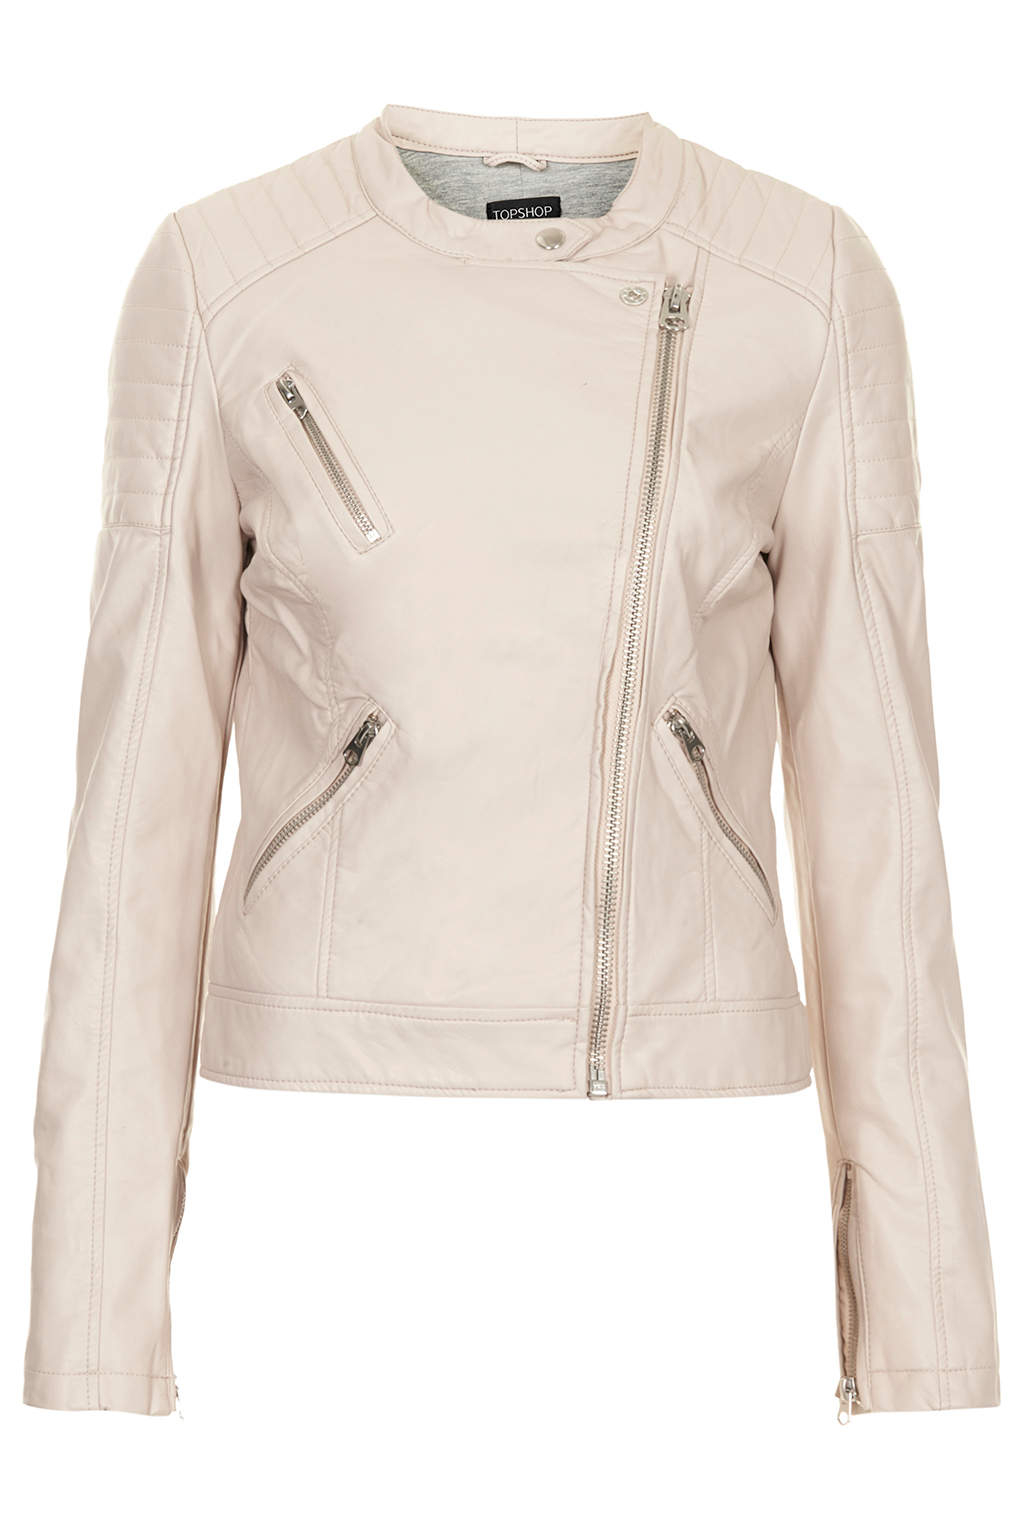 Topshop Collarless Faux Leather Biker Jacket in Pink | Lyst